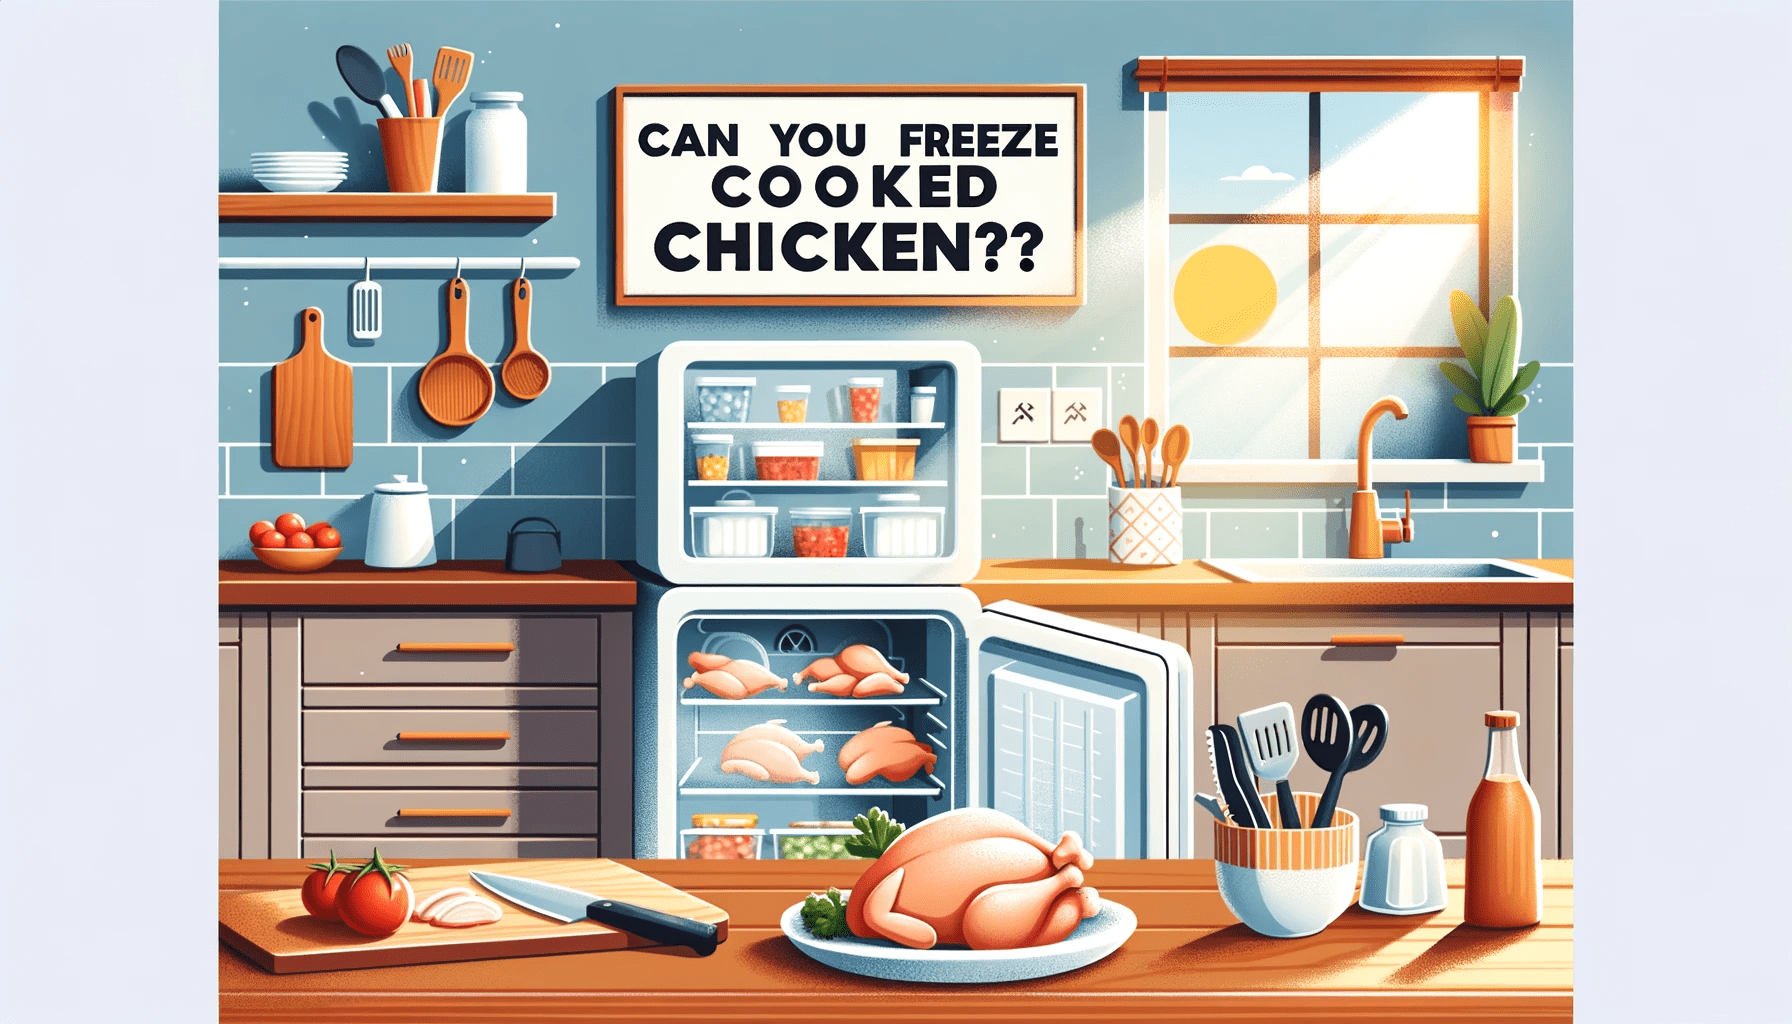 Can You Freeze Cooked Chicken